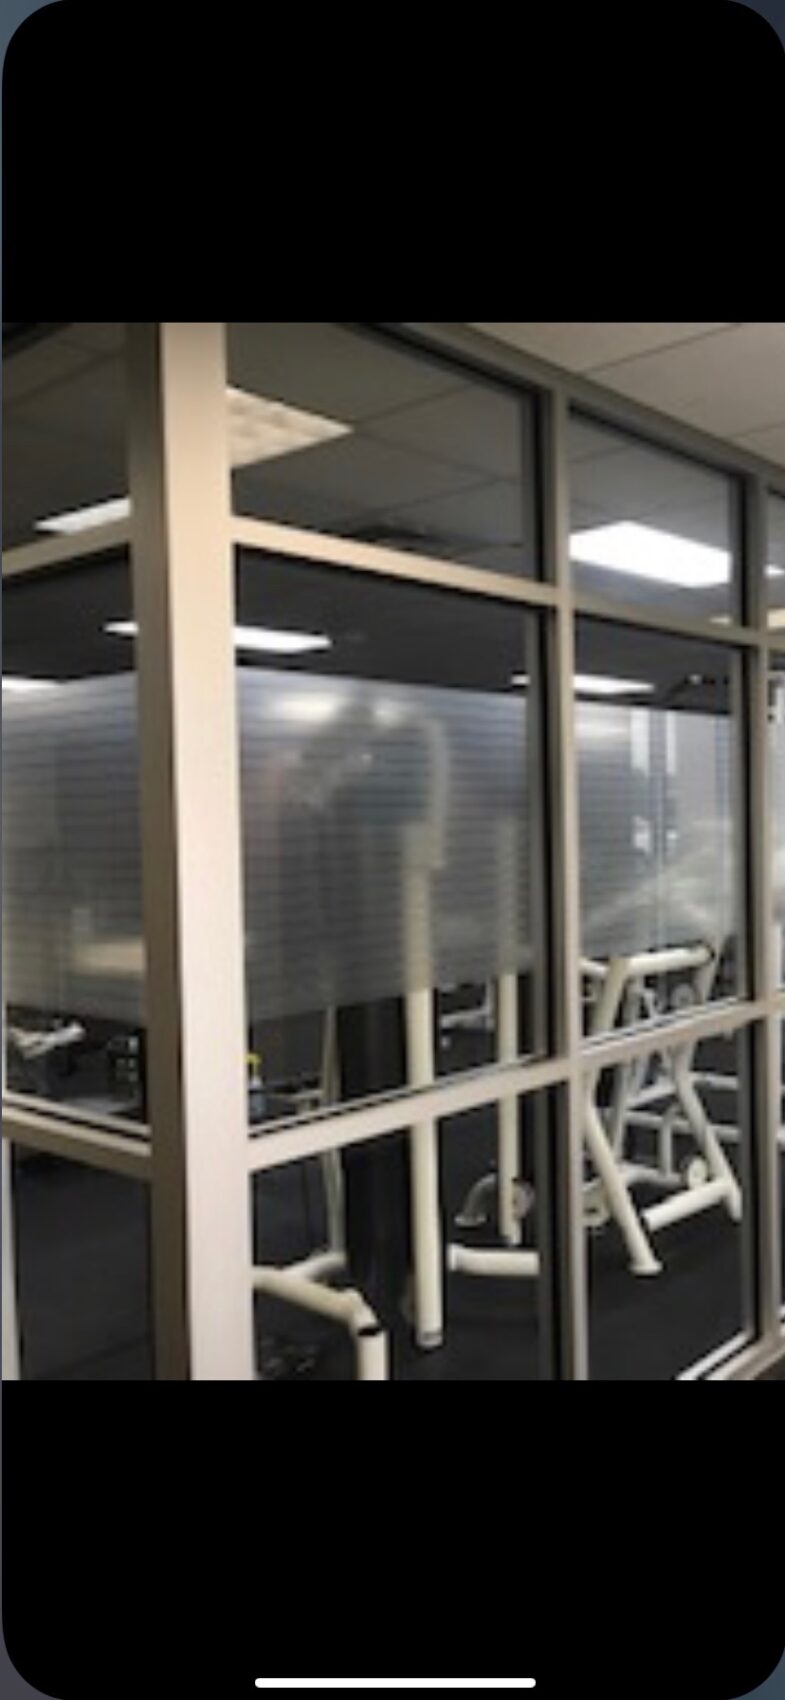 Fasara Decorative Window Films installed at a gym in Allentown PA by Sun Control Plus